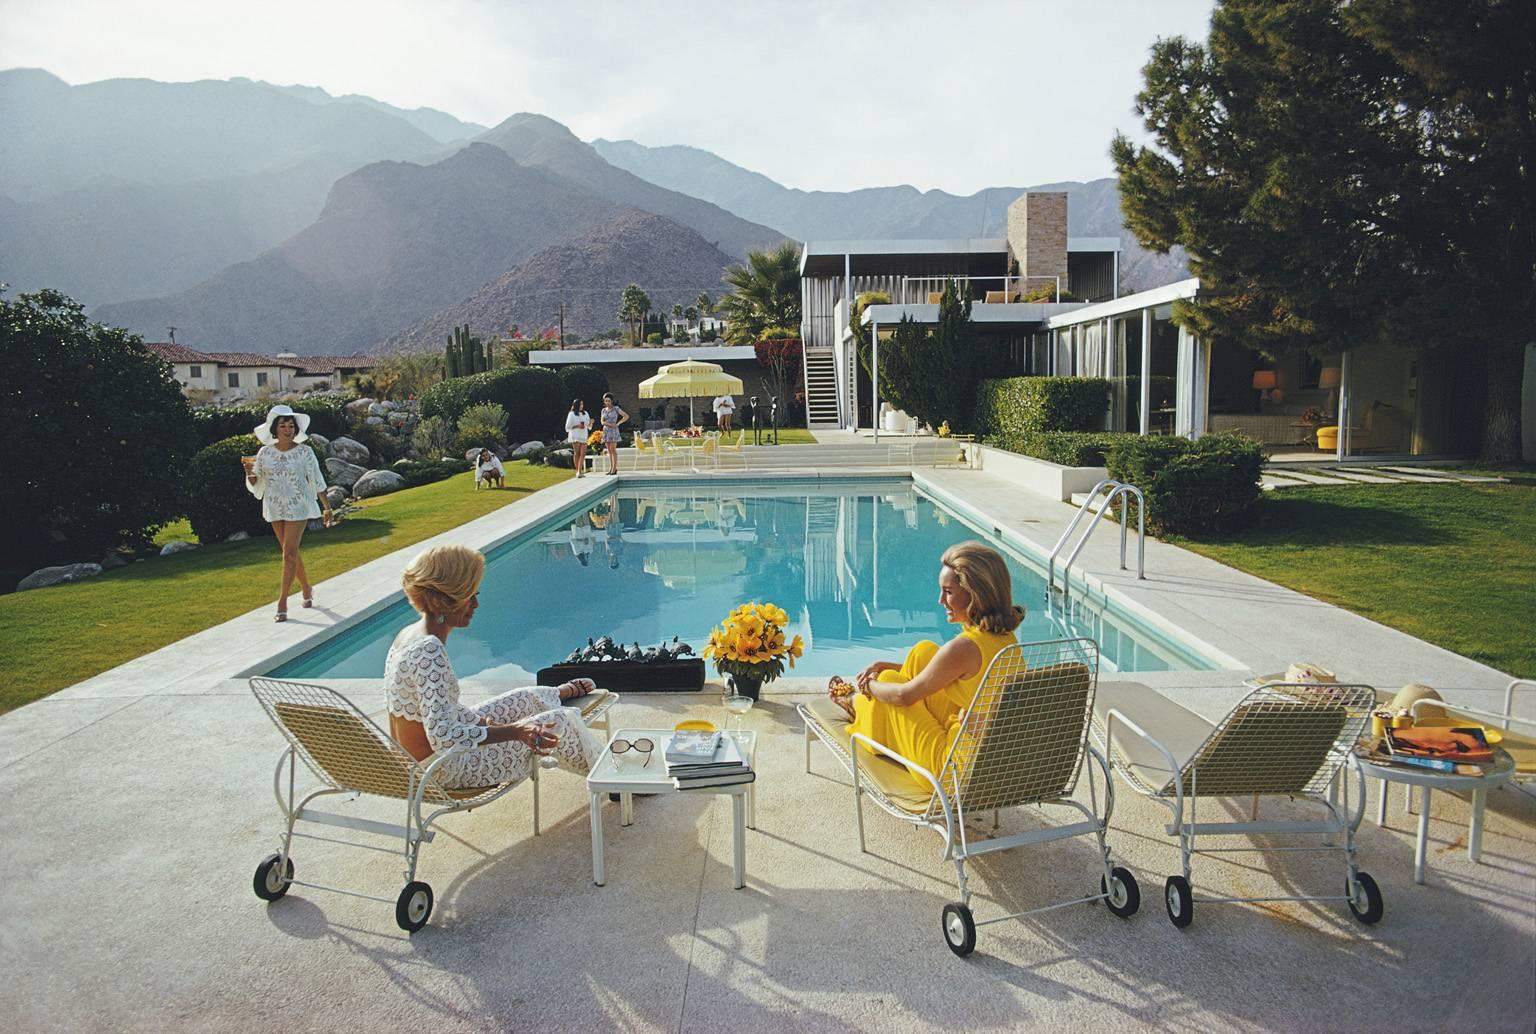 'Poolside Gossip' by Slim Aarons

Extra Large Oversize 40 x 30 inches  / 101 x 76 cm paper size

A true Slim Aarons Classic - it is considered to be a true modern masterpiece of photography. 

A poolside party at a desert house, designed by Richard